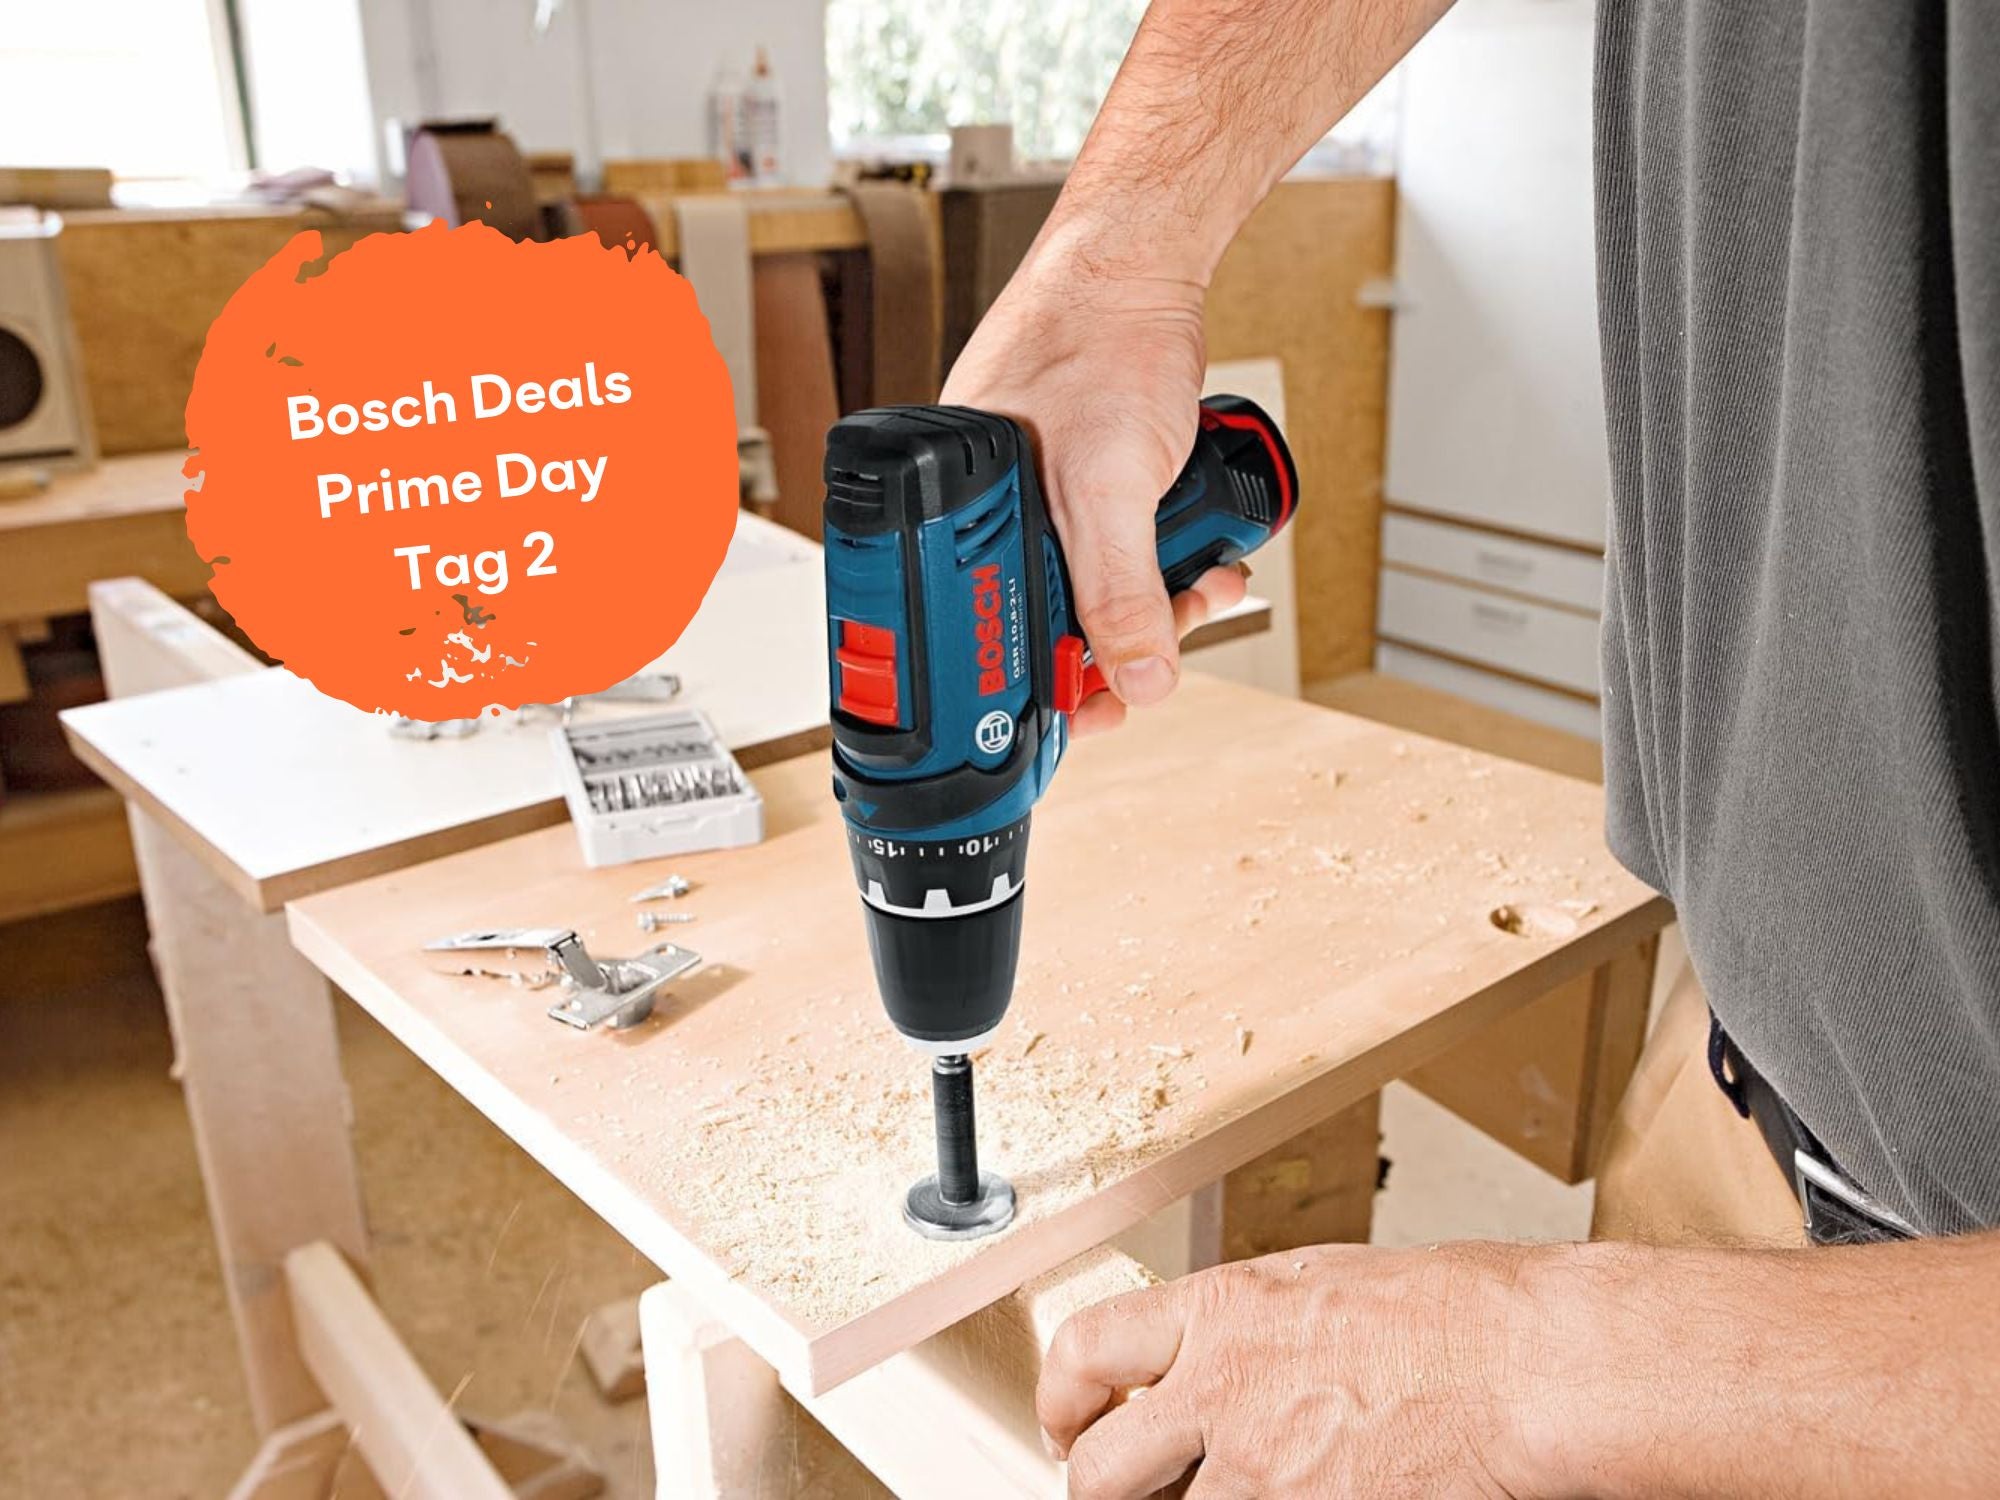 Bosch Deals am Prime Day Tag 2